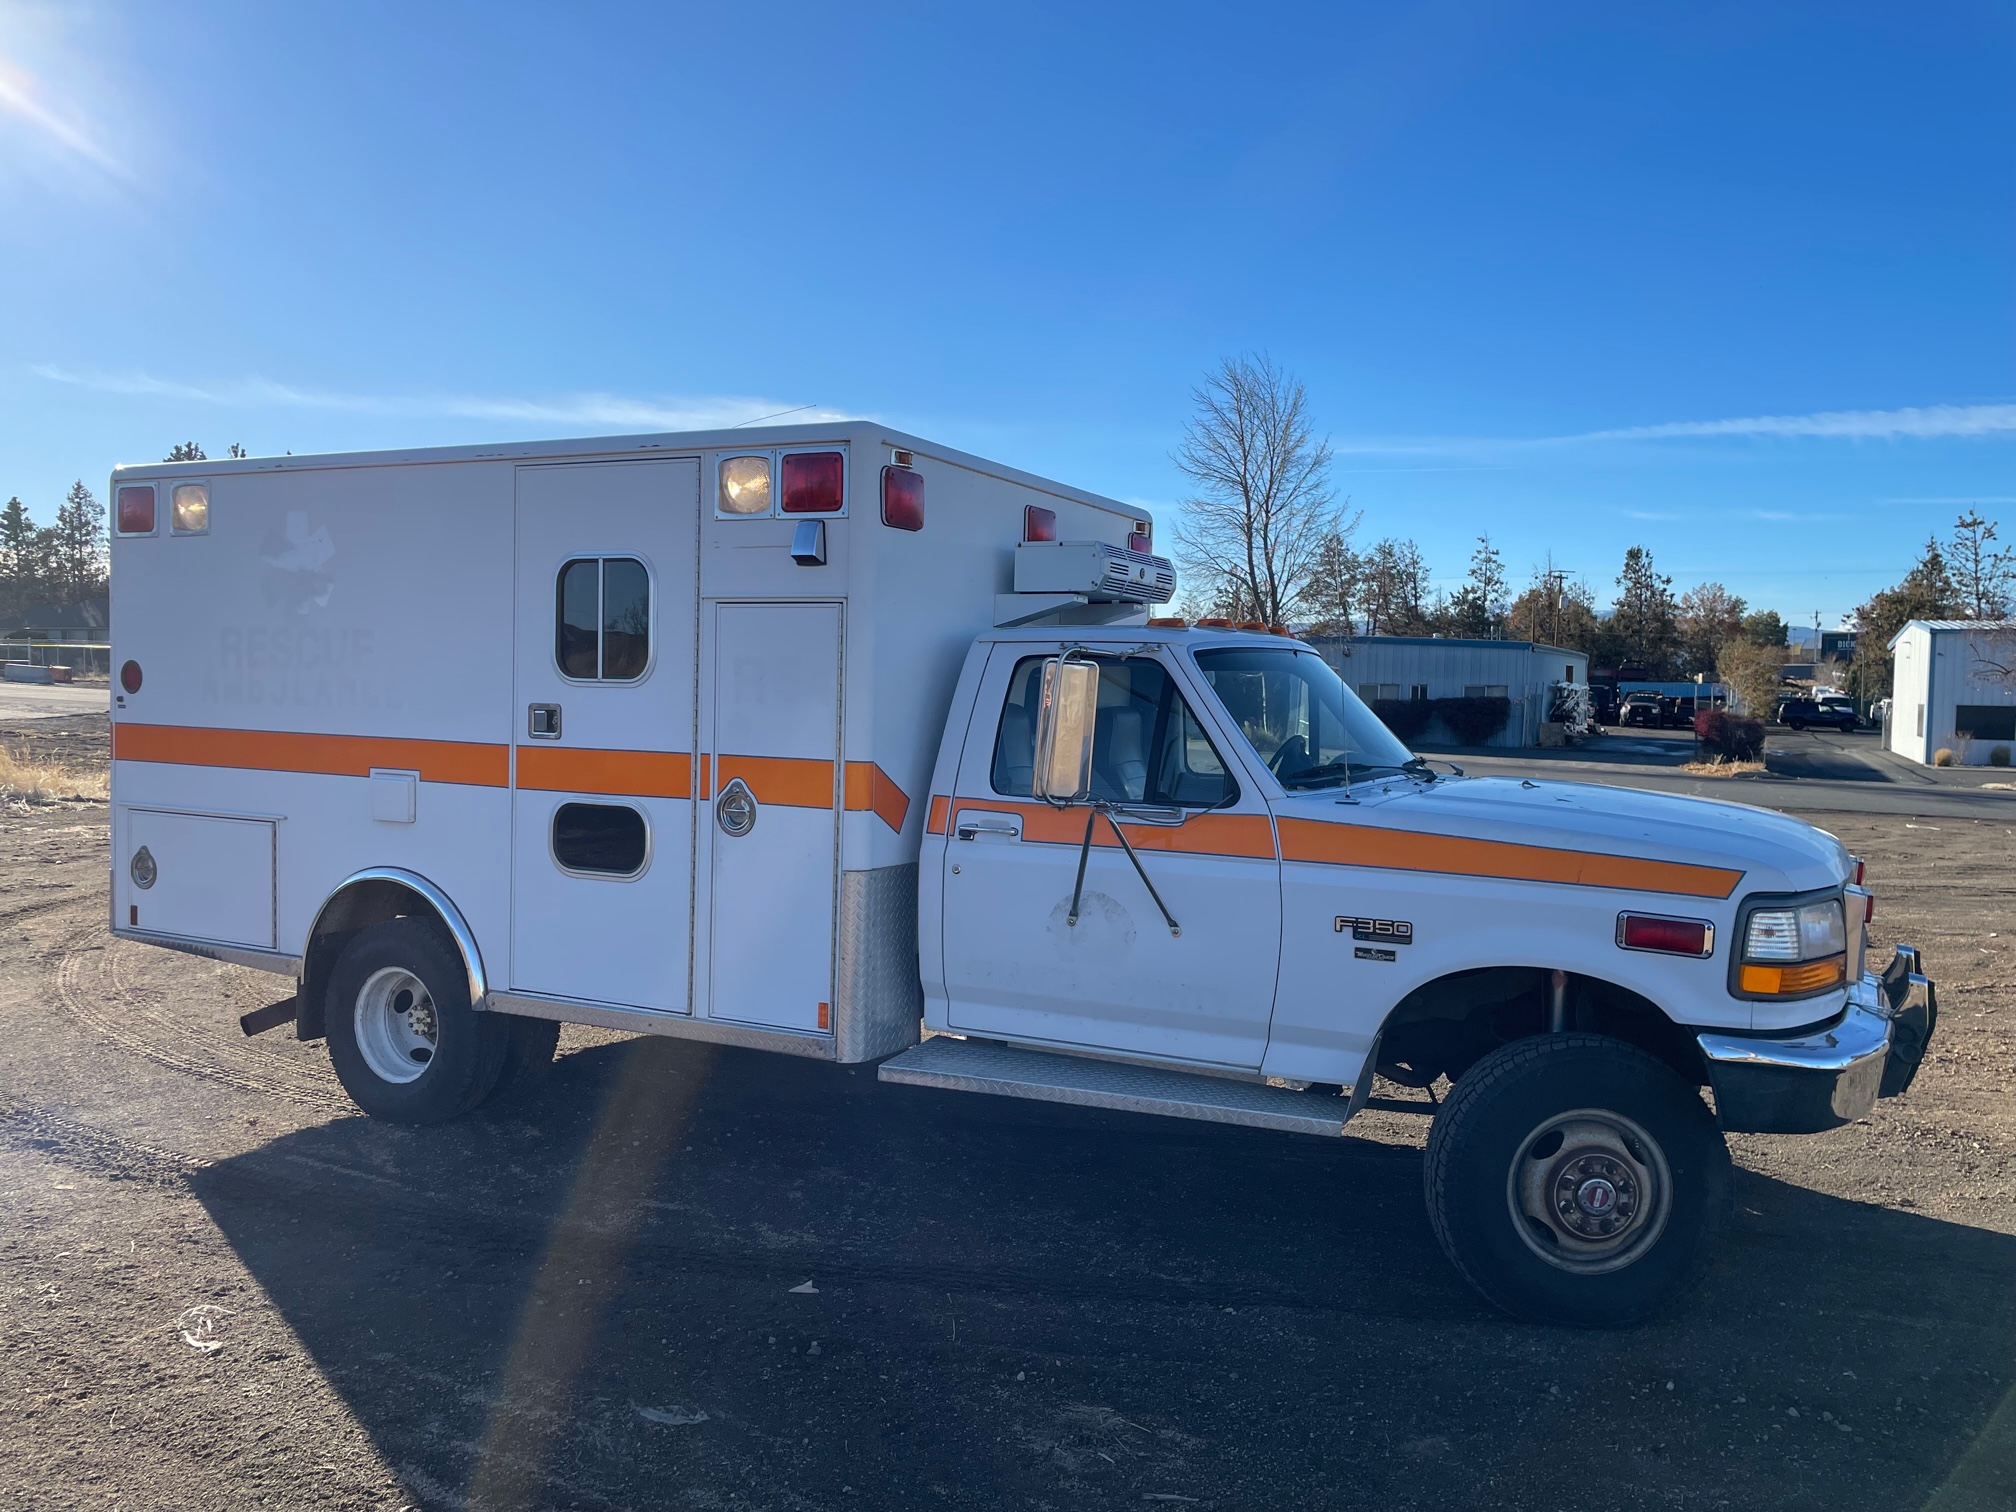 -SOLD - 4x4 F350 Ambulance, 7.3 Diesel, 130k Miles - SOLD- | Expedition ...